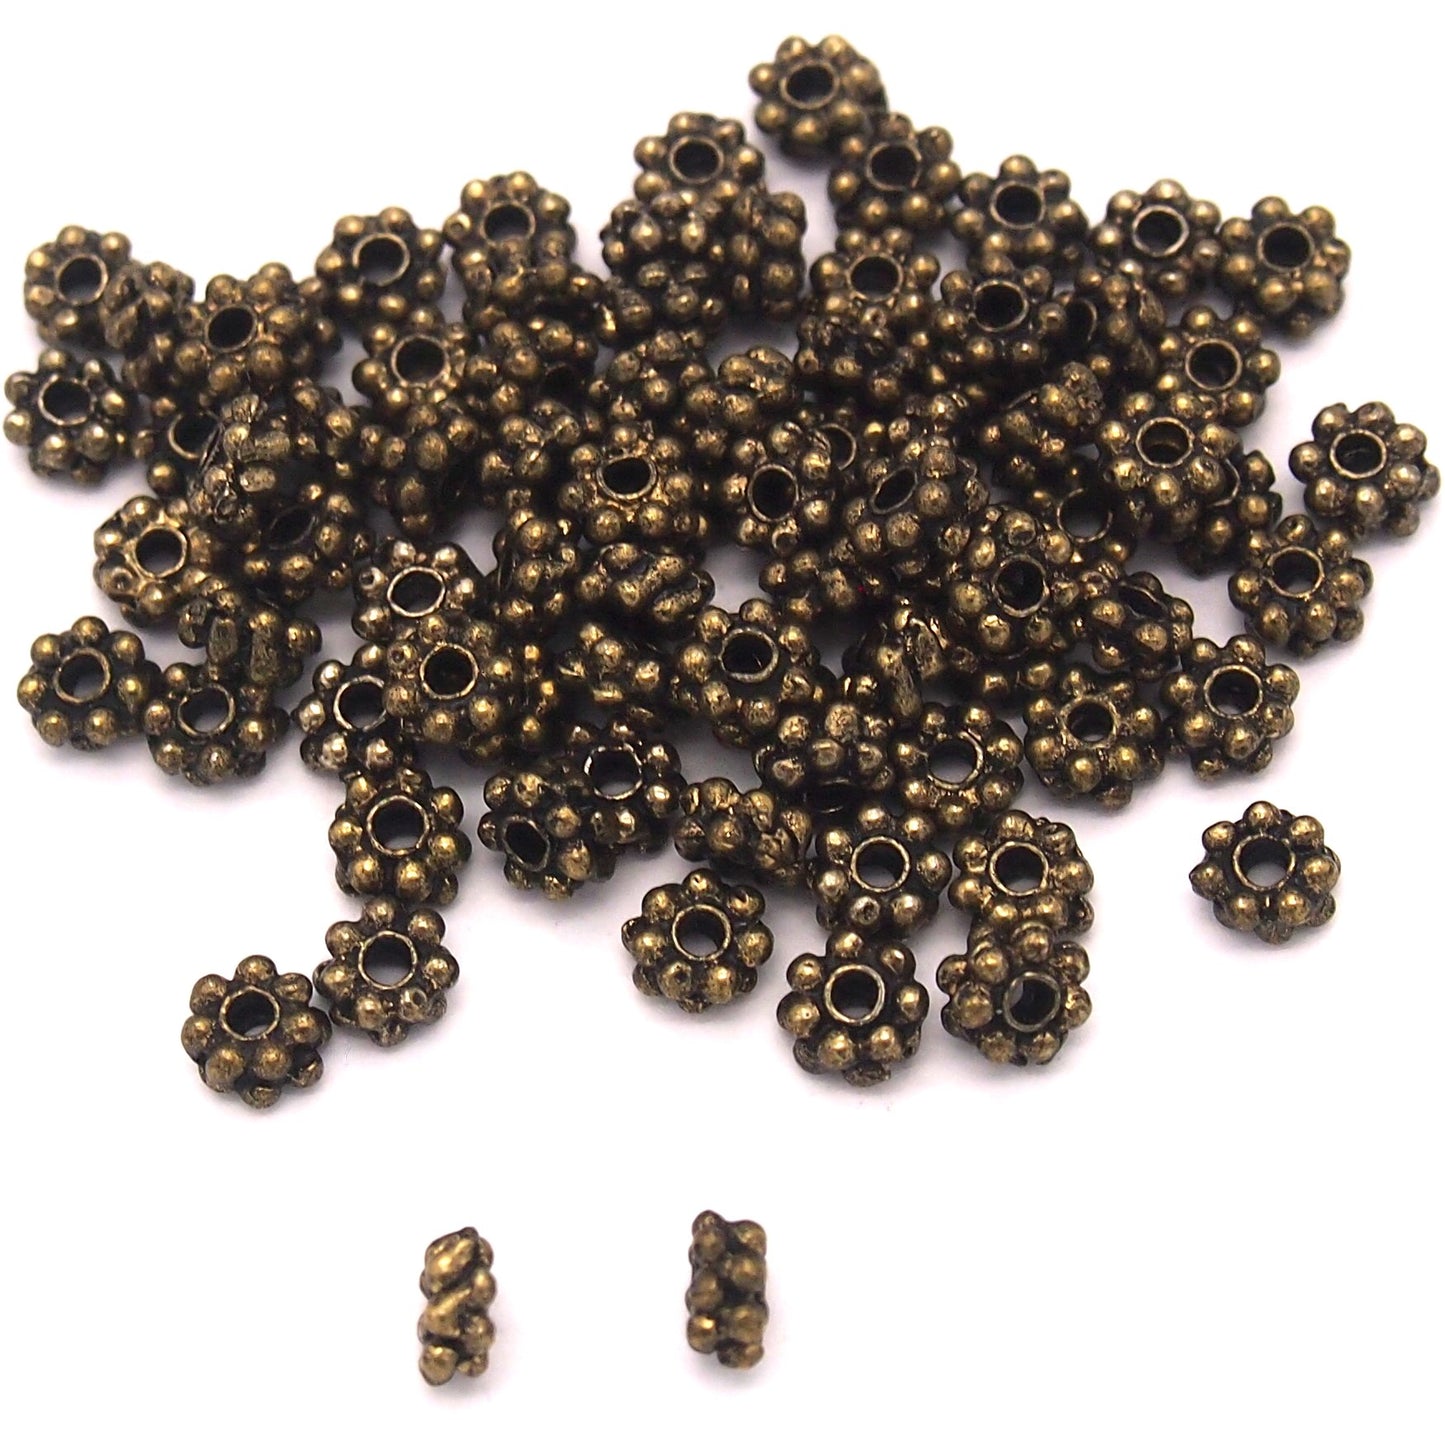 Bali Spacer Daisy Antique Gold Plated Beads 5mm 80Pcs Approx.